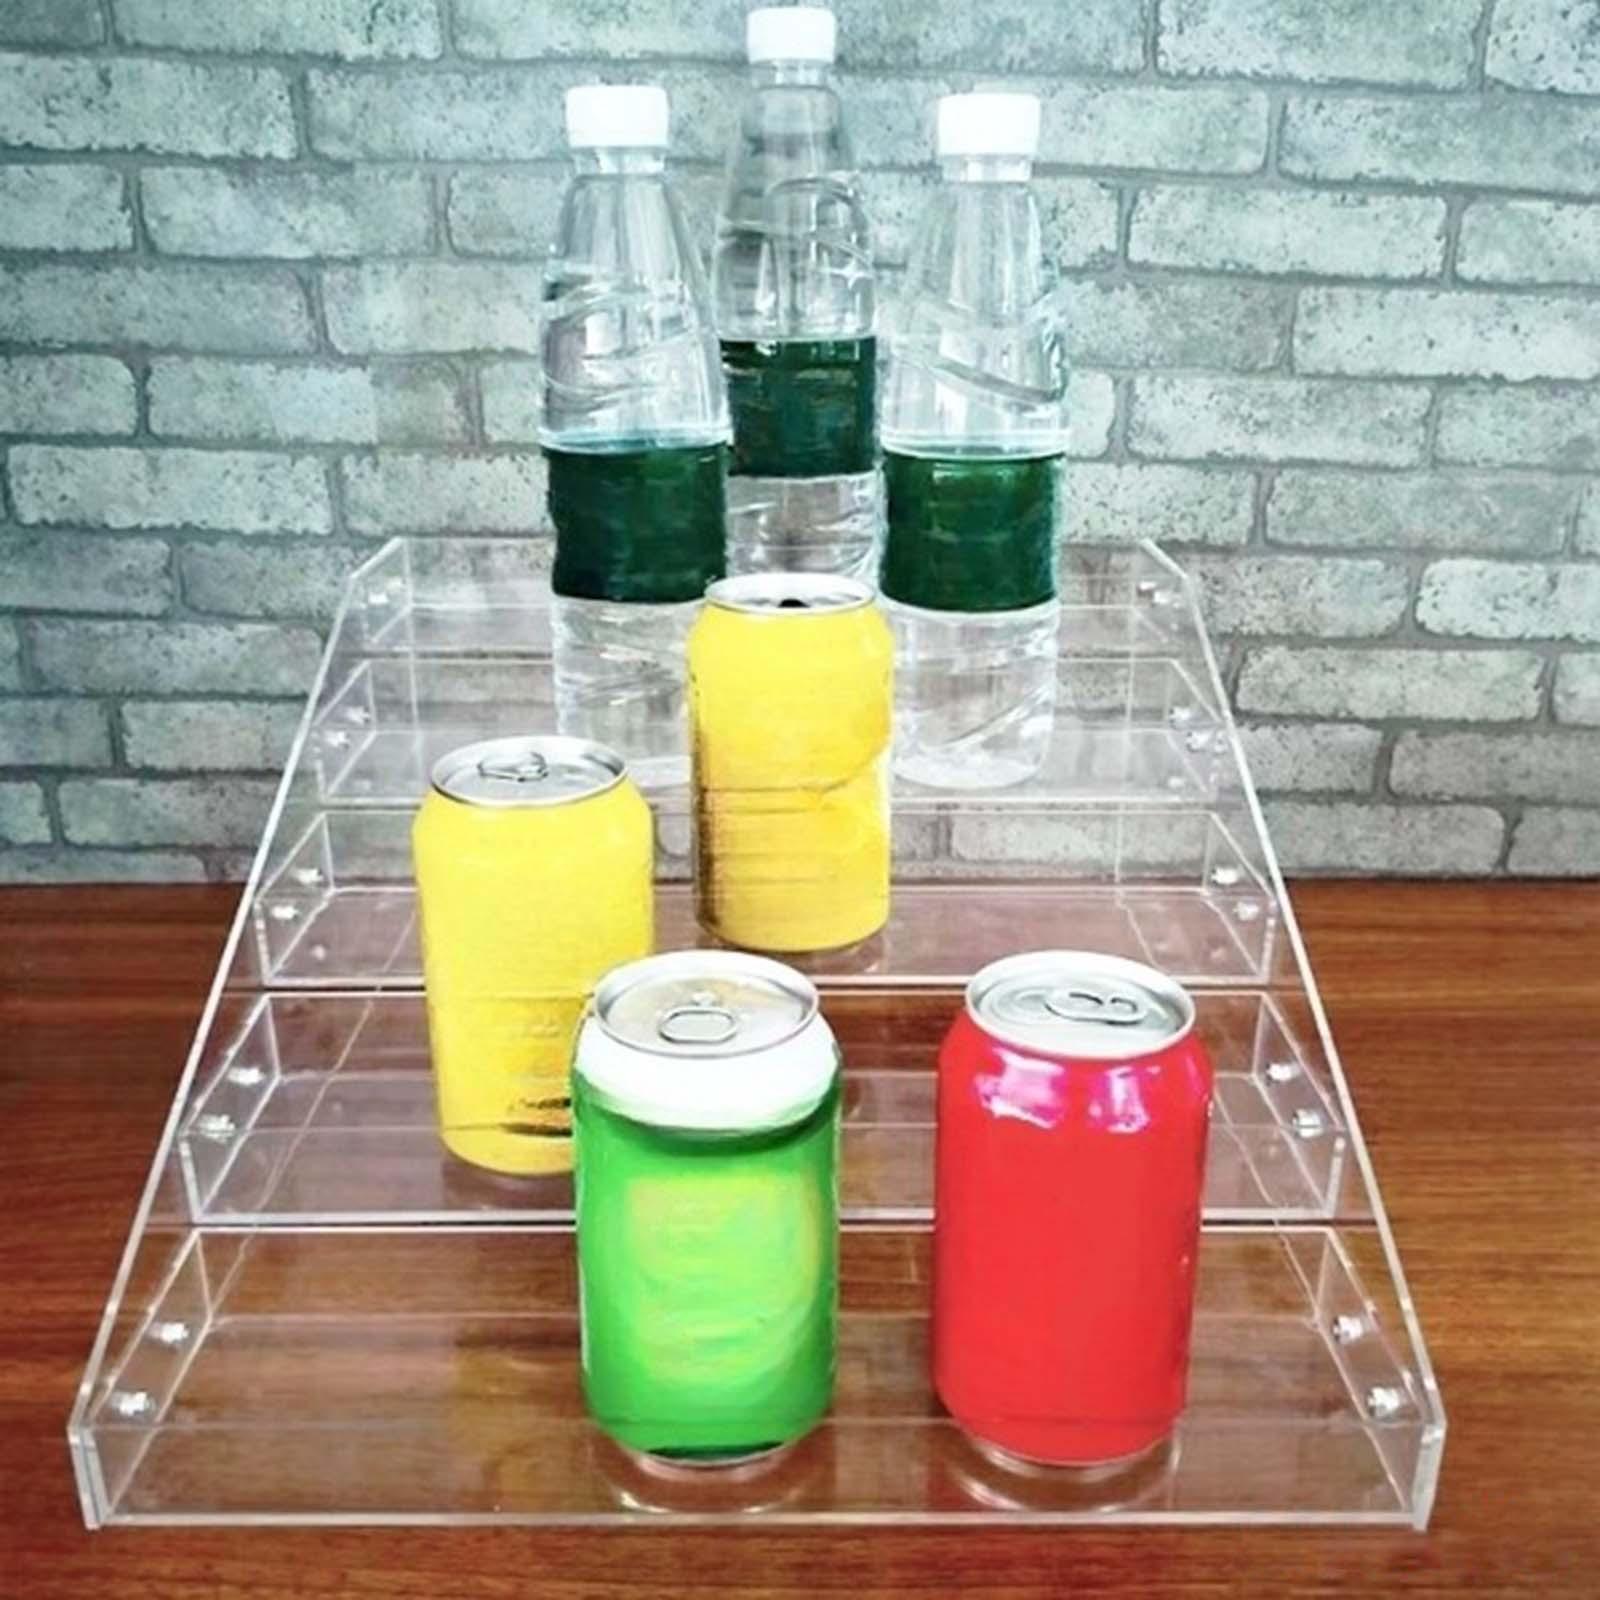 Spice Rack Storage Shelves 5 Step Tea Cup Stand Shelf for Candies Toys Model